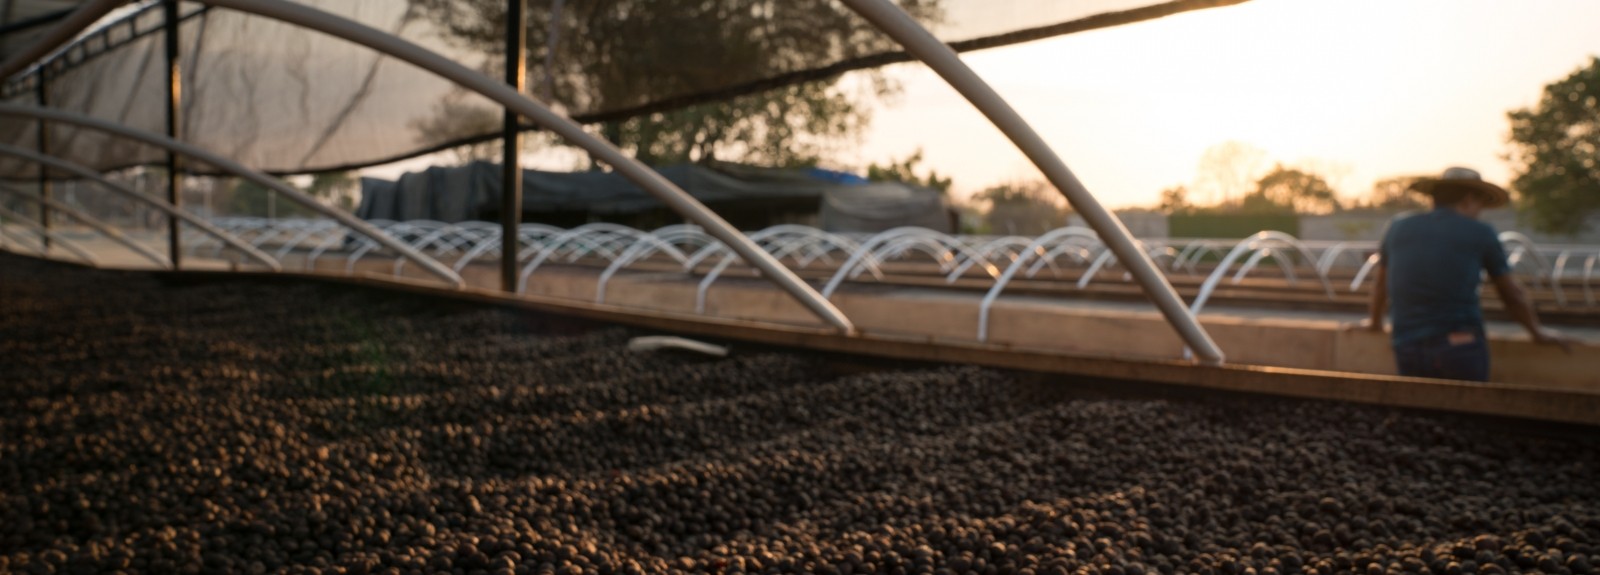 Coffee dries on elevated beds as farmer in a hat with his back to the camera looks over a bed